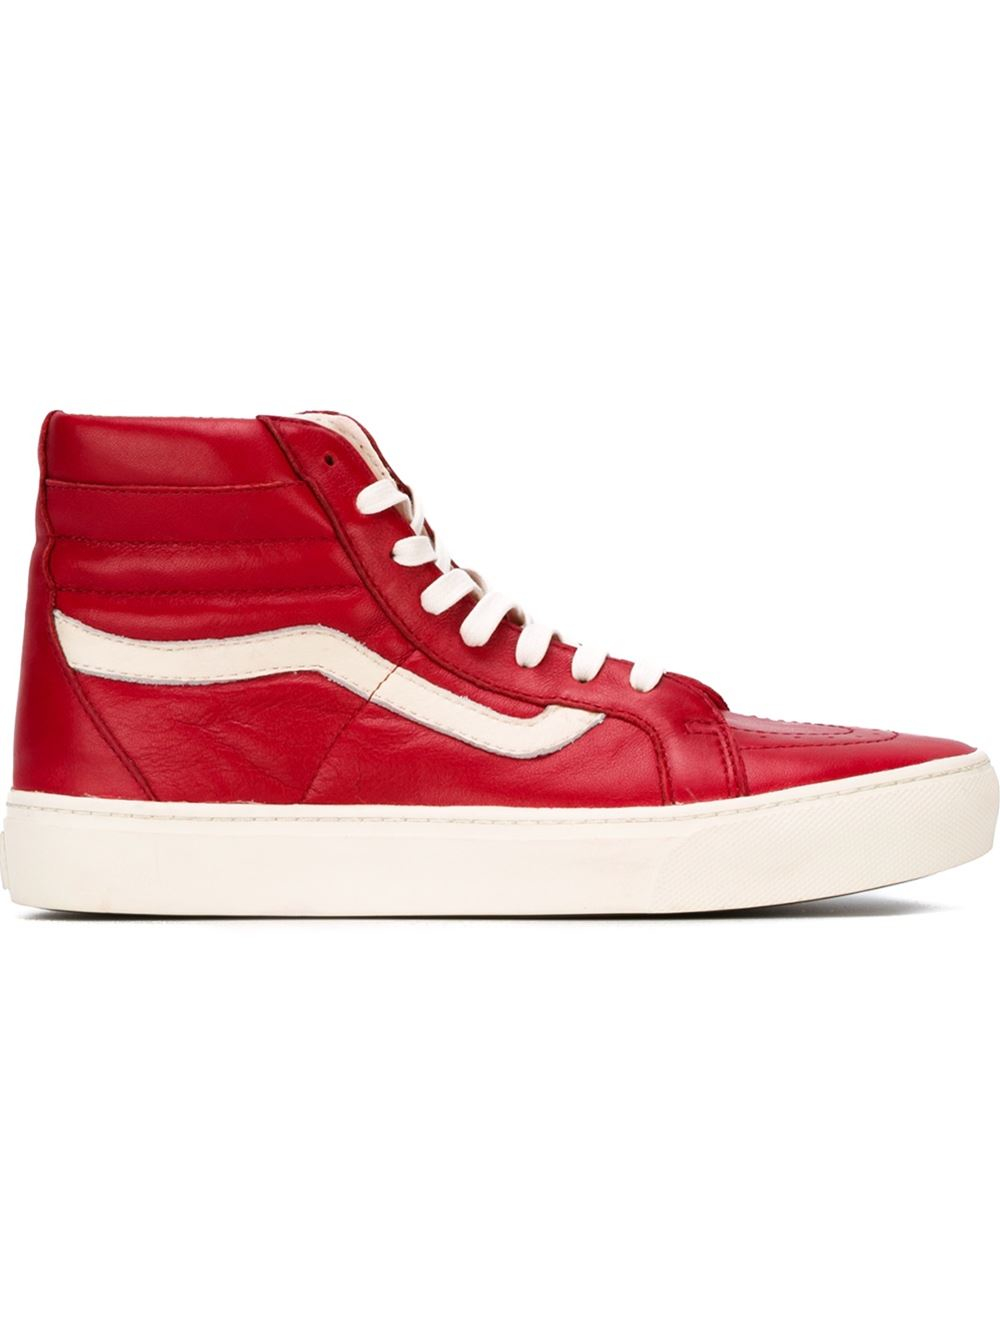 Vans Quilted-Leather High-Top Sneakers 